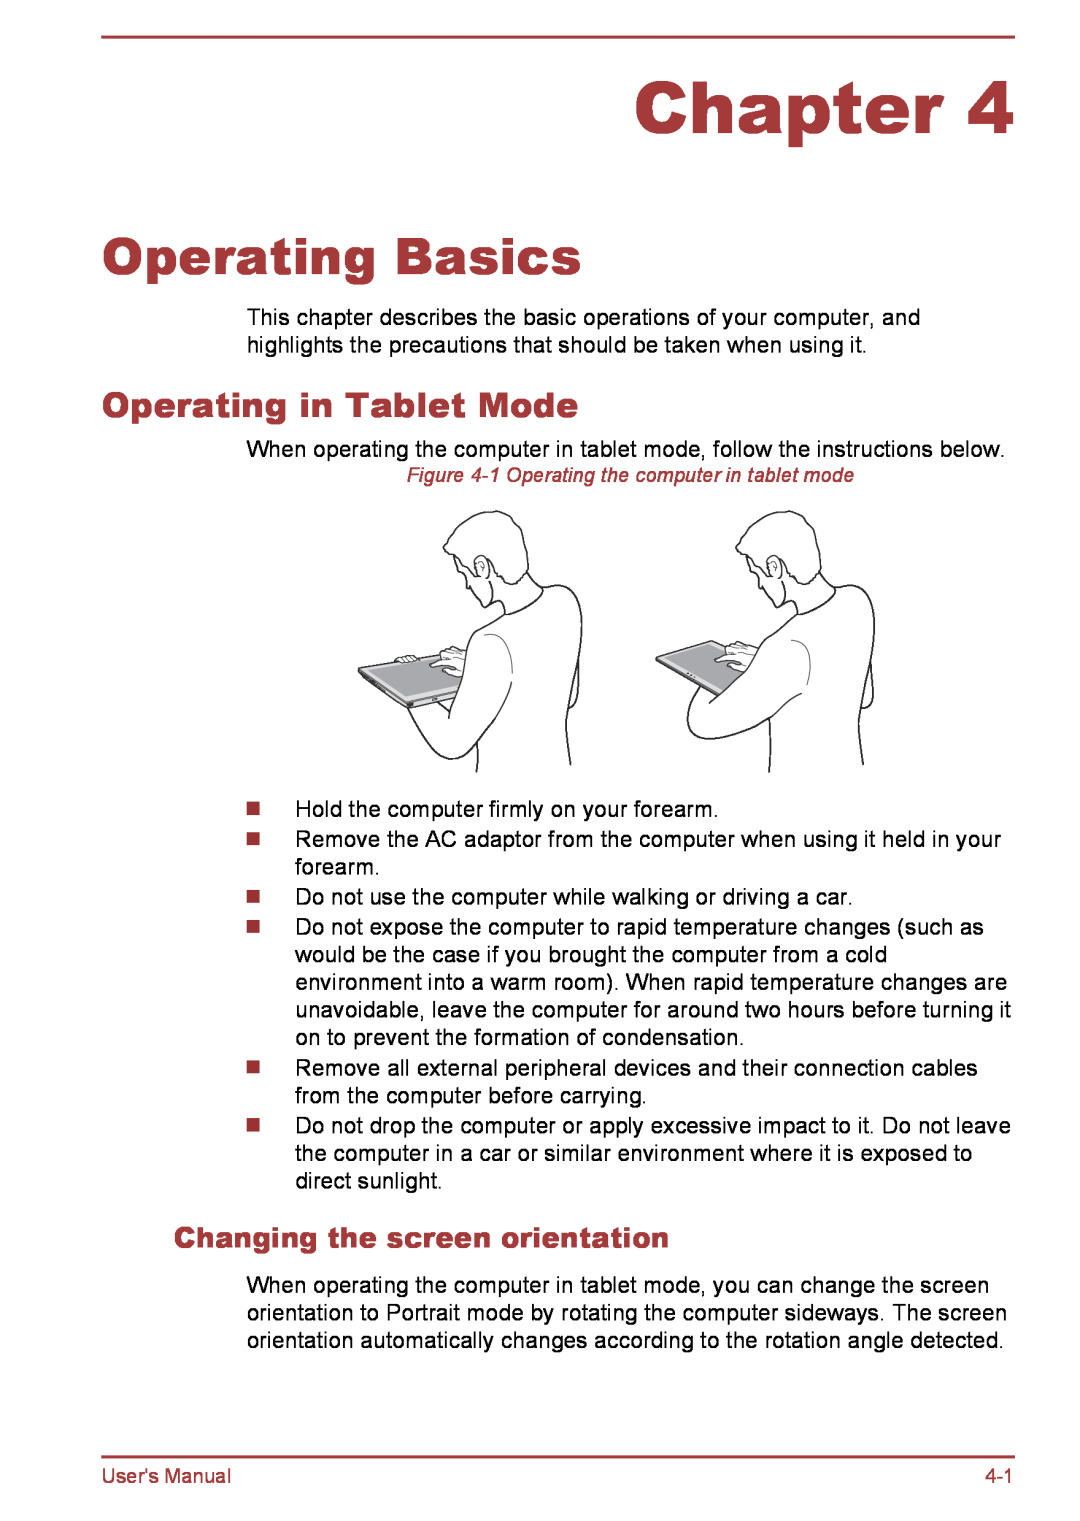 Toshiba L35W-B, L30W-B user manual Operating Basics, Operating in Tablet Mode, Changing the screen orientation, Chapter 